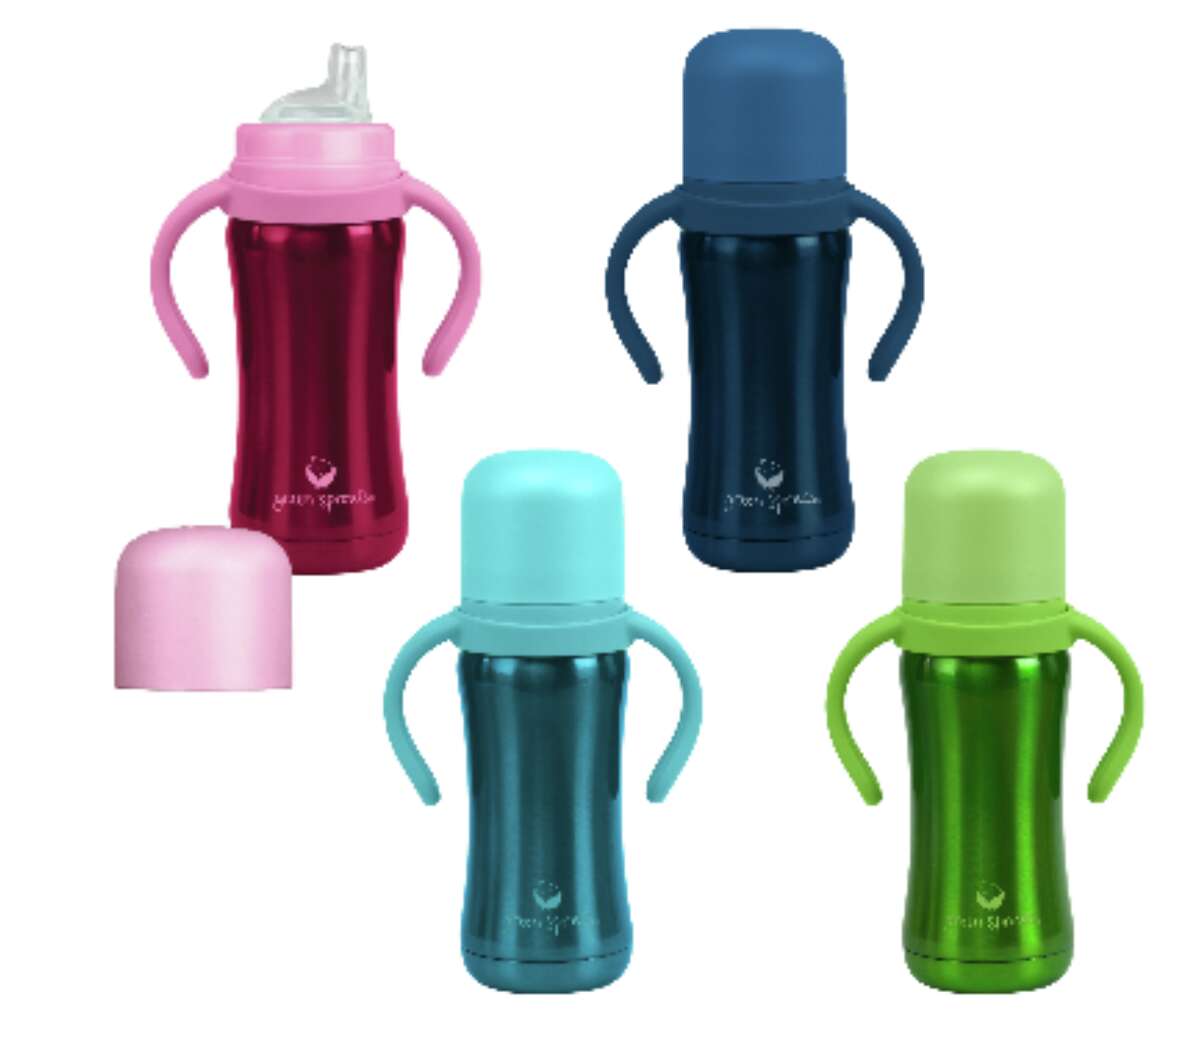 Green Sprouts stainless steel baby bottles and cups have been recalled for a lead poisoning hazard. 